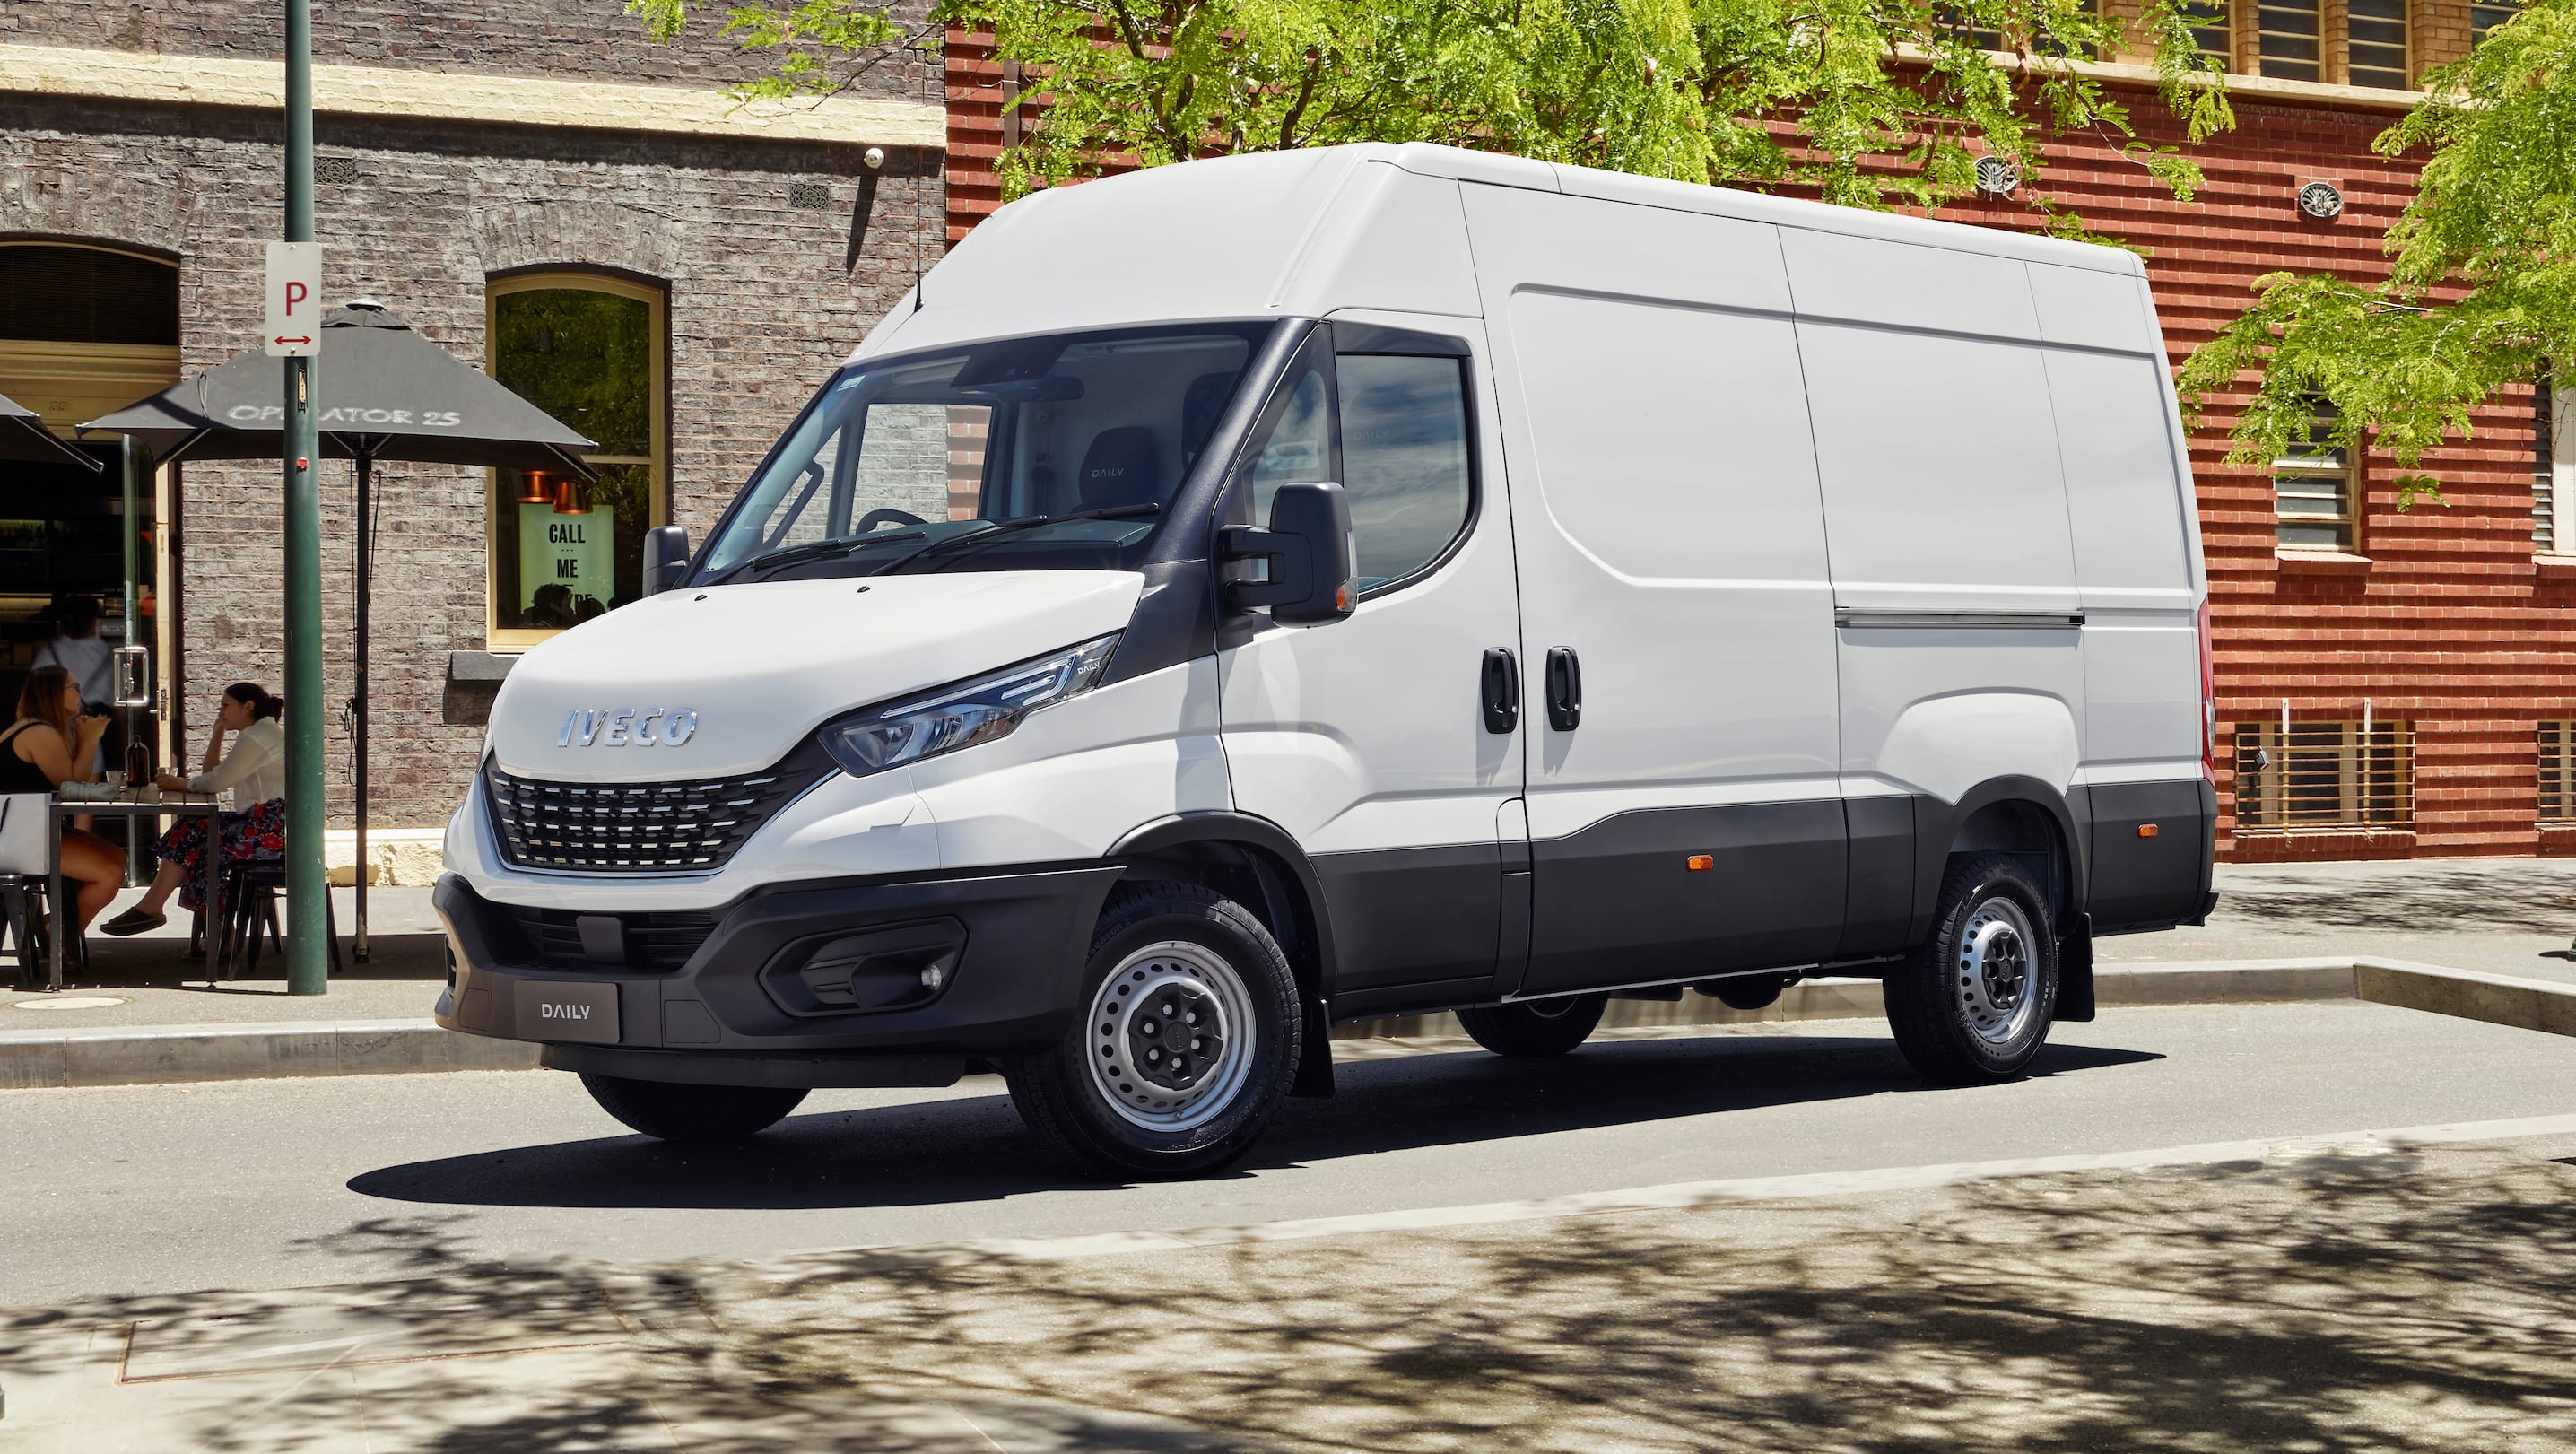 https://carsguide-res.cloudinary.com/image/upload/f_auto%2Cfl_lossy%2Cq_auto%2Ct_default/v1/editorial/2021-Iveco-Daily-Van-1001x565%20%281%29.jpg